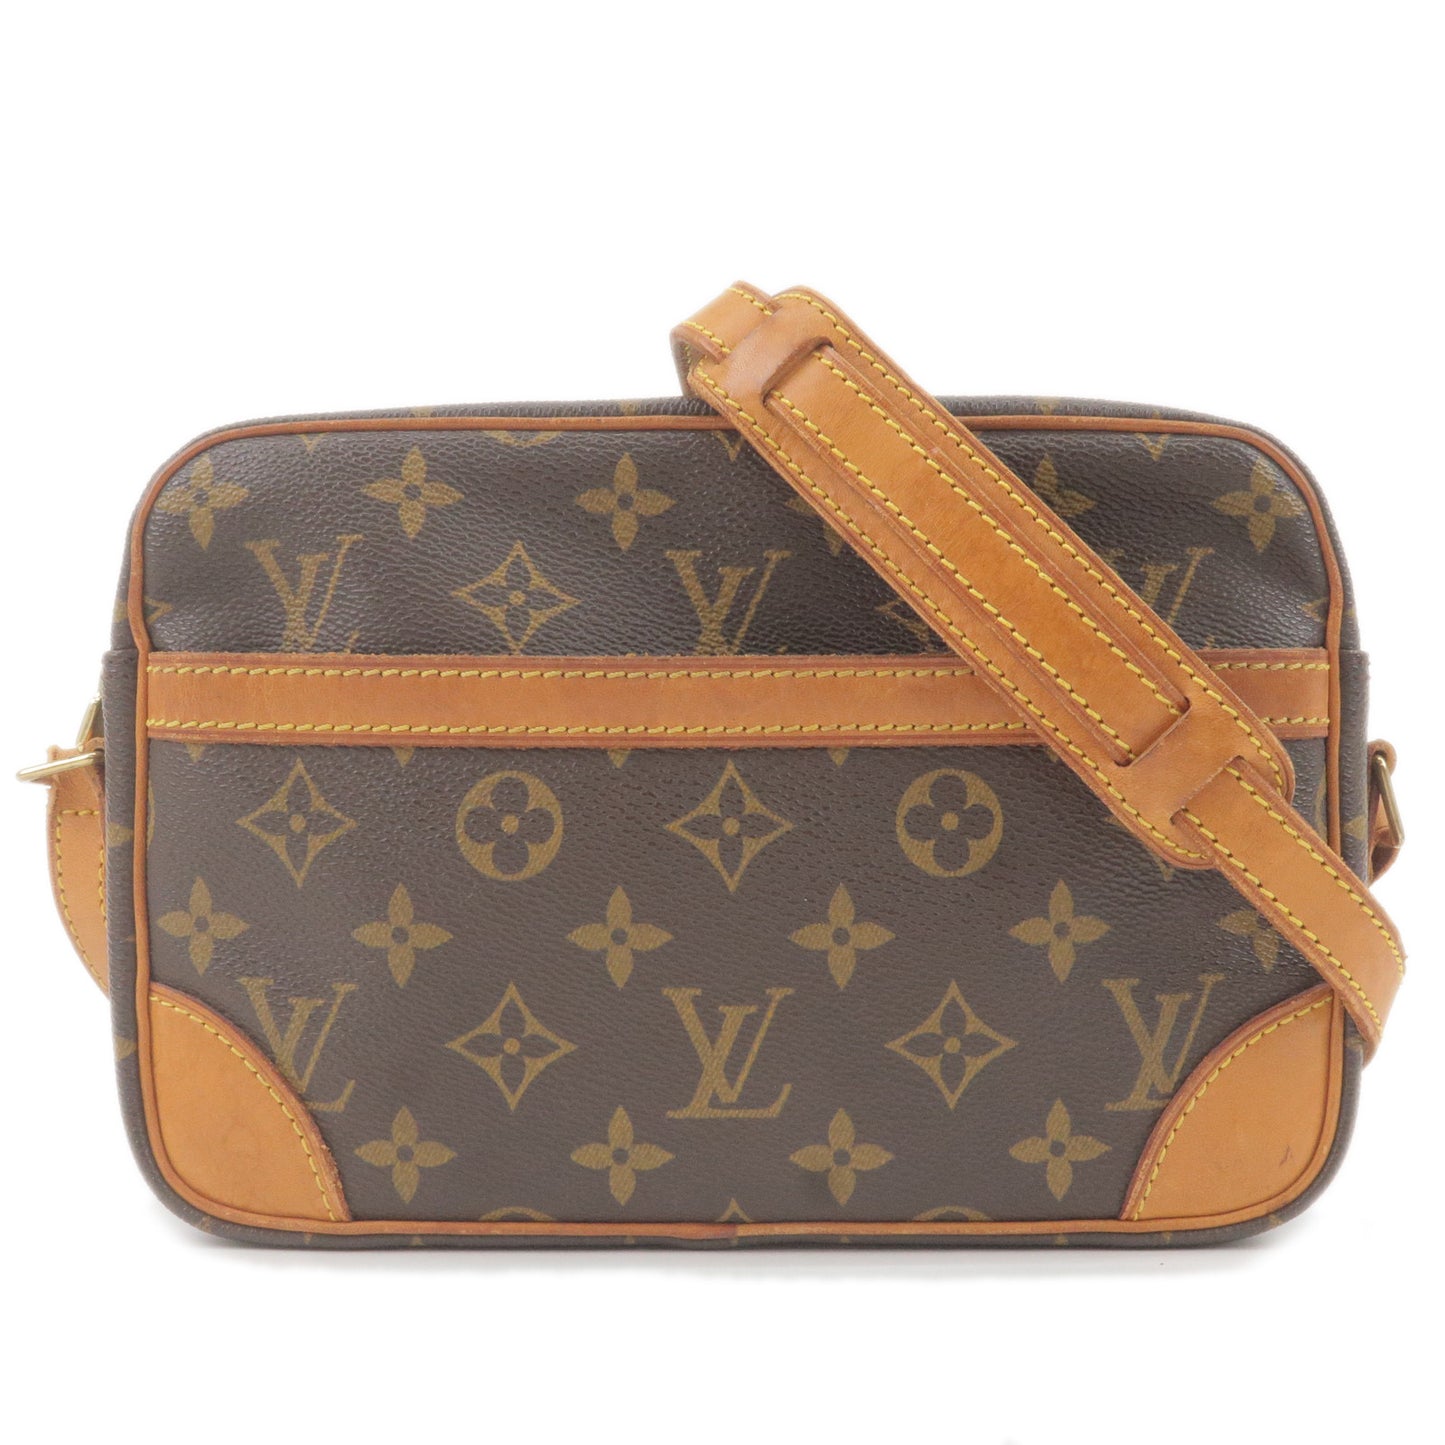 Instagram : The Trocadero Messenger bag from Louis Vuitton is